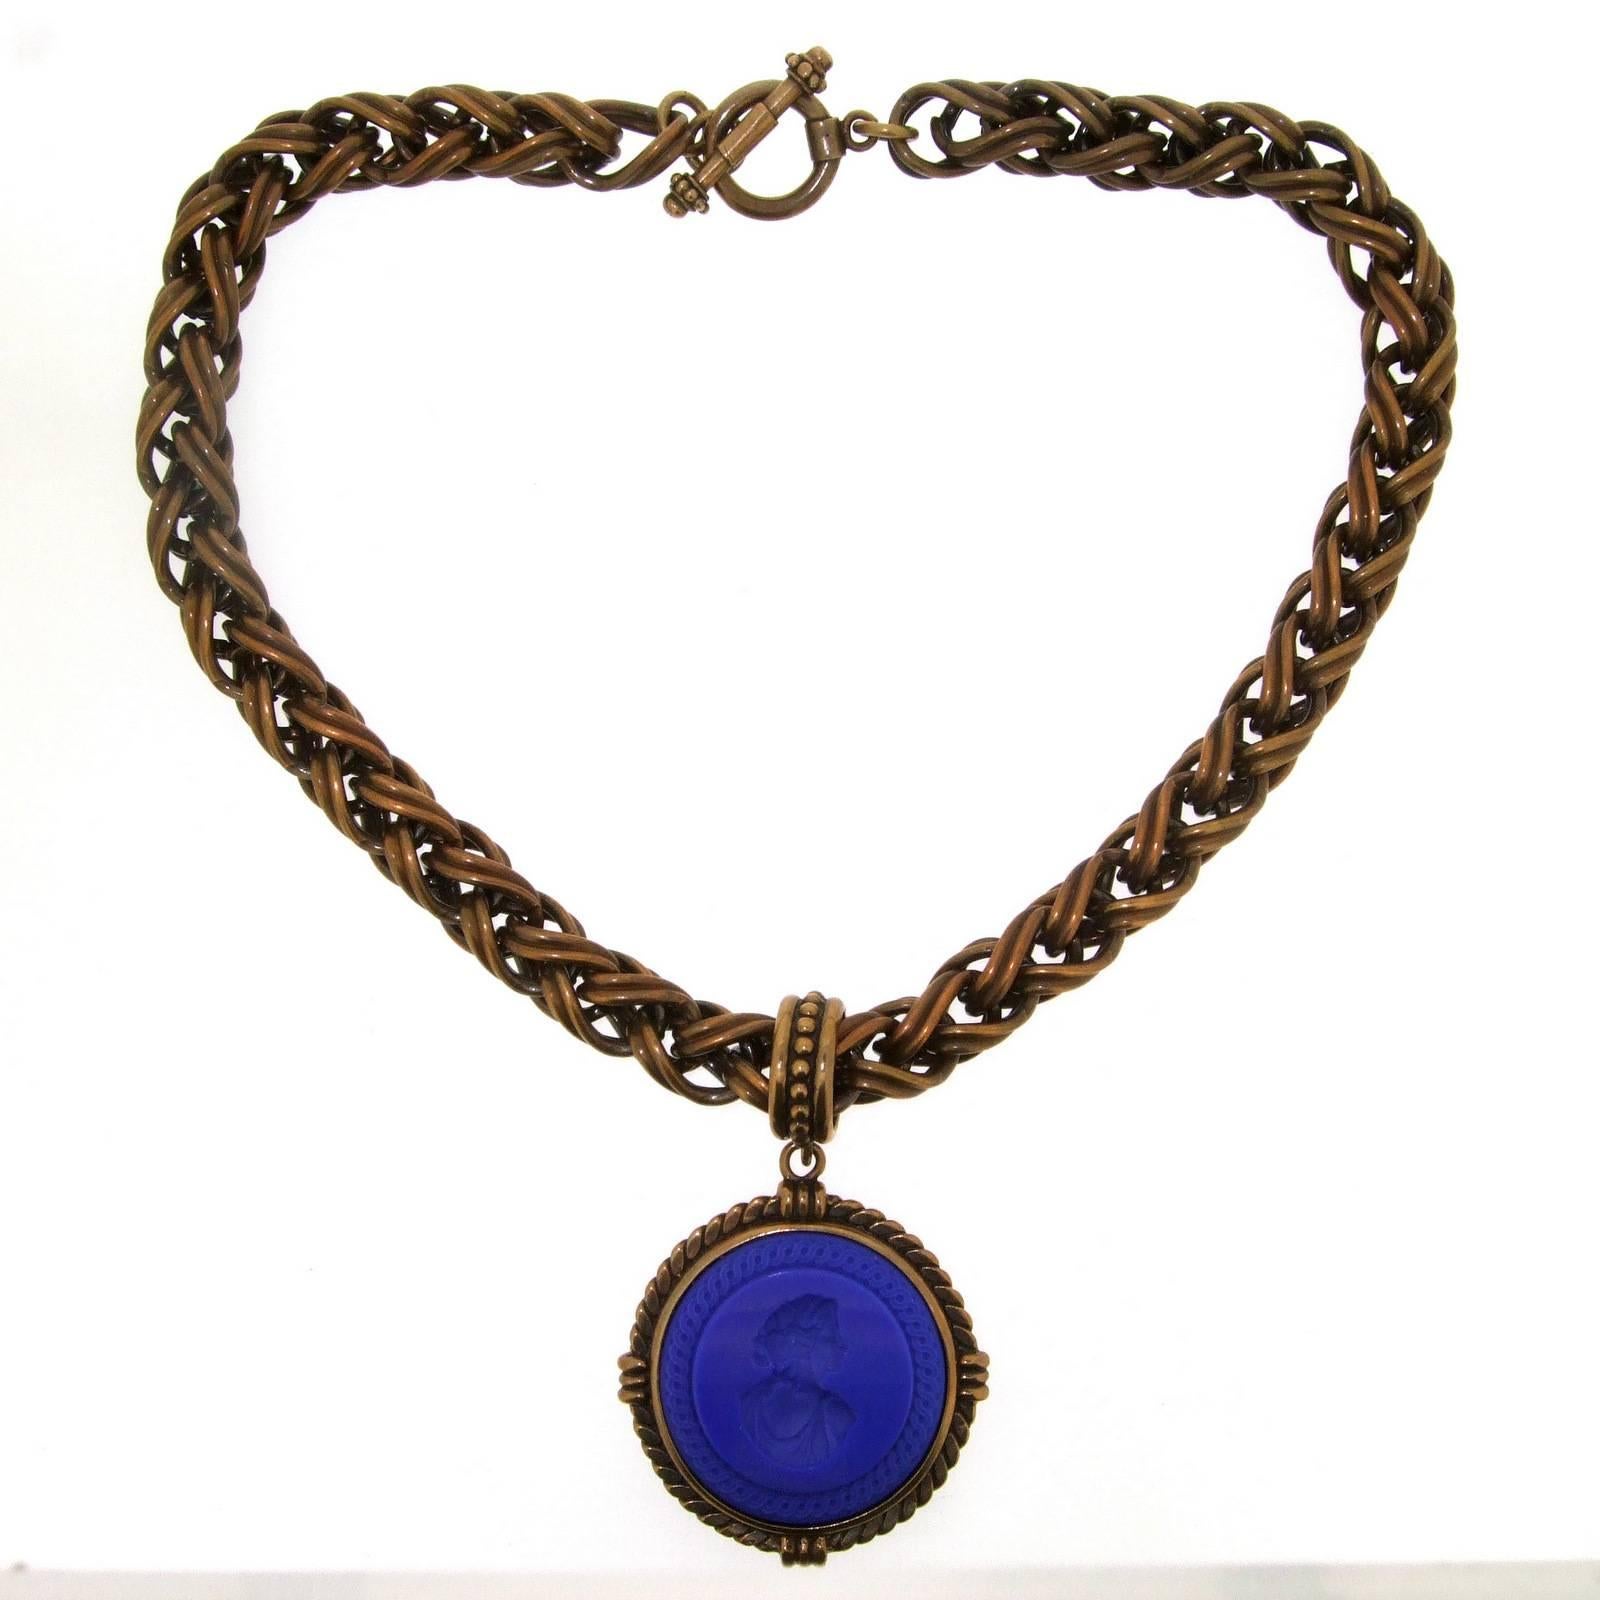 Stunning charm pendant necklace by Extasia with a beautiful blue German glass intaglio in bronze chain.